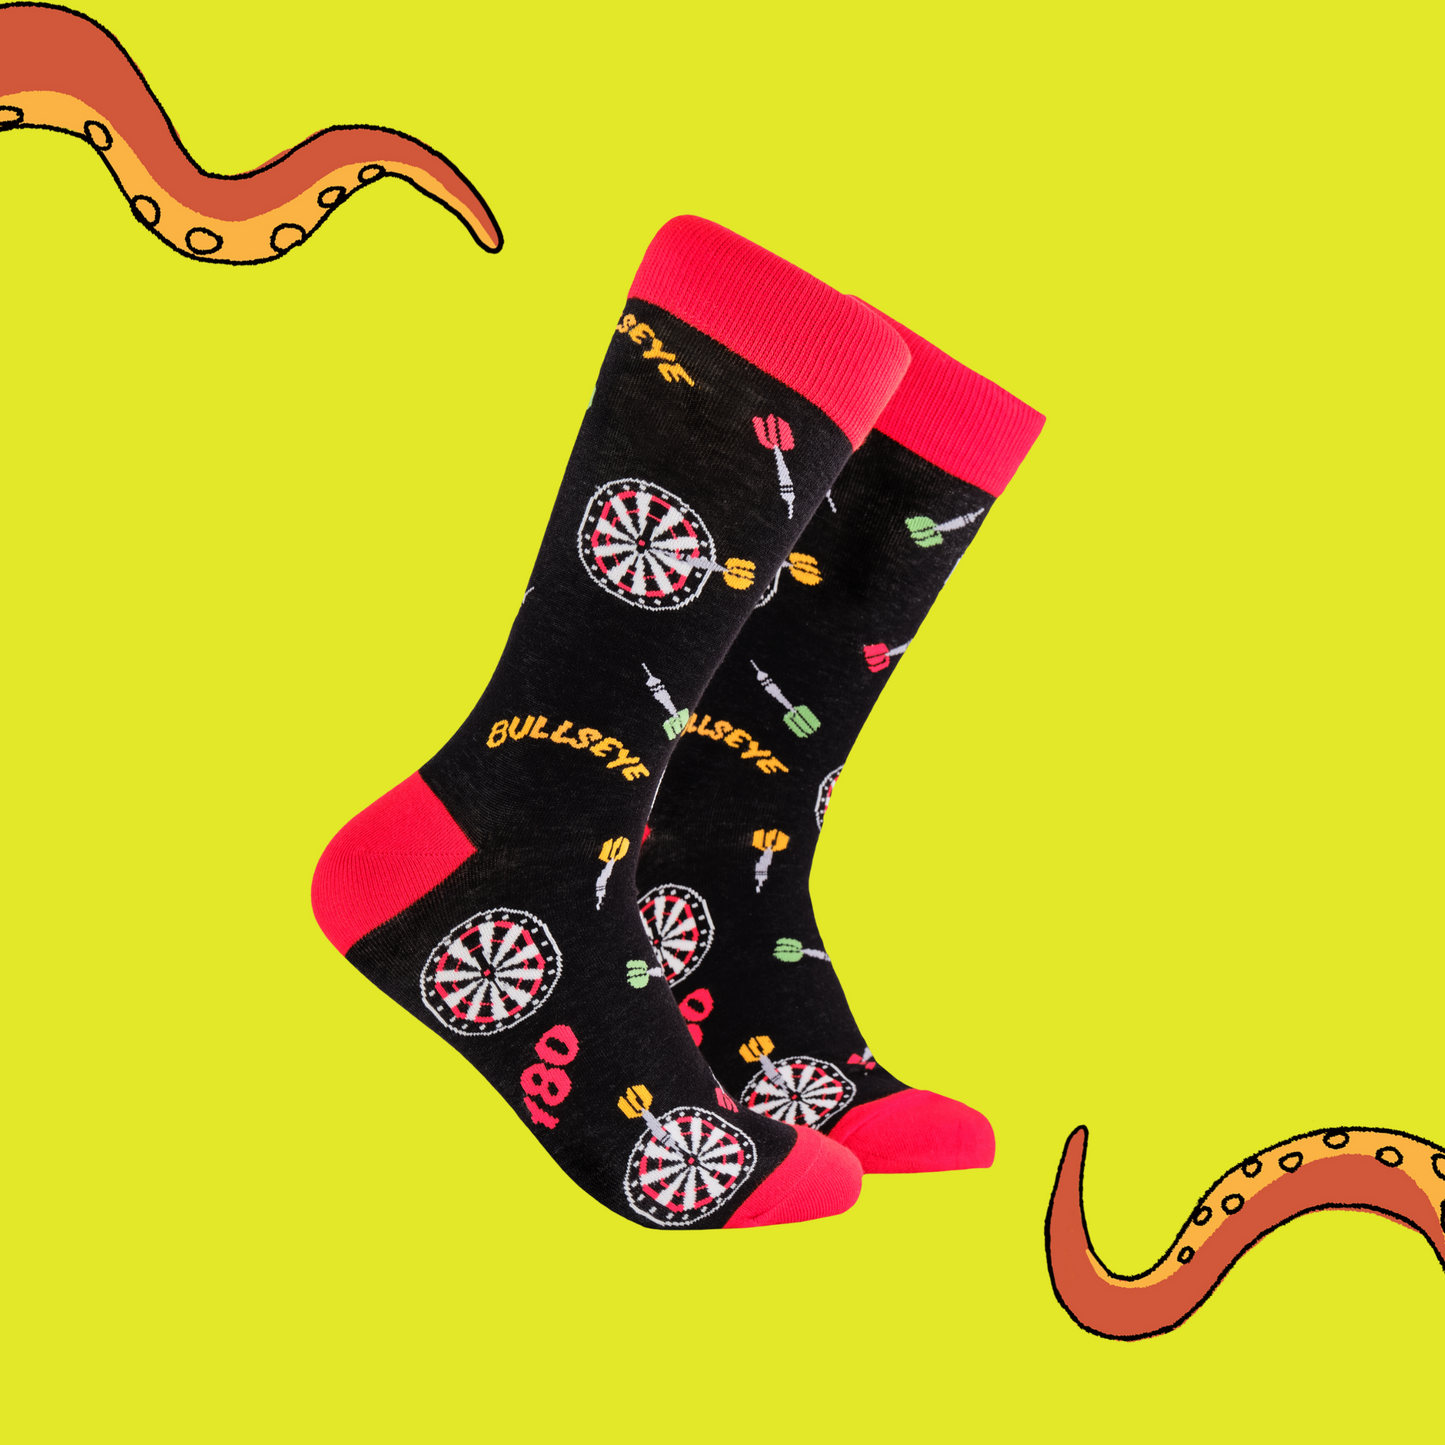 A pair of socks depicting darts and dartboards. Black legs, red cuff, heel and toe.